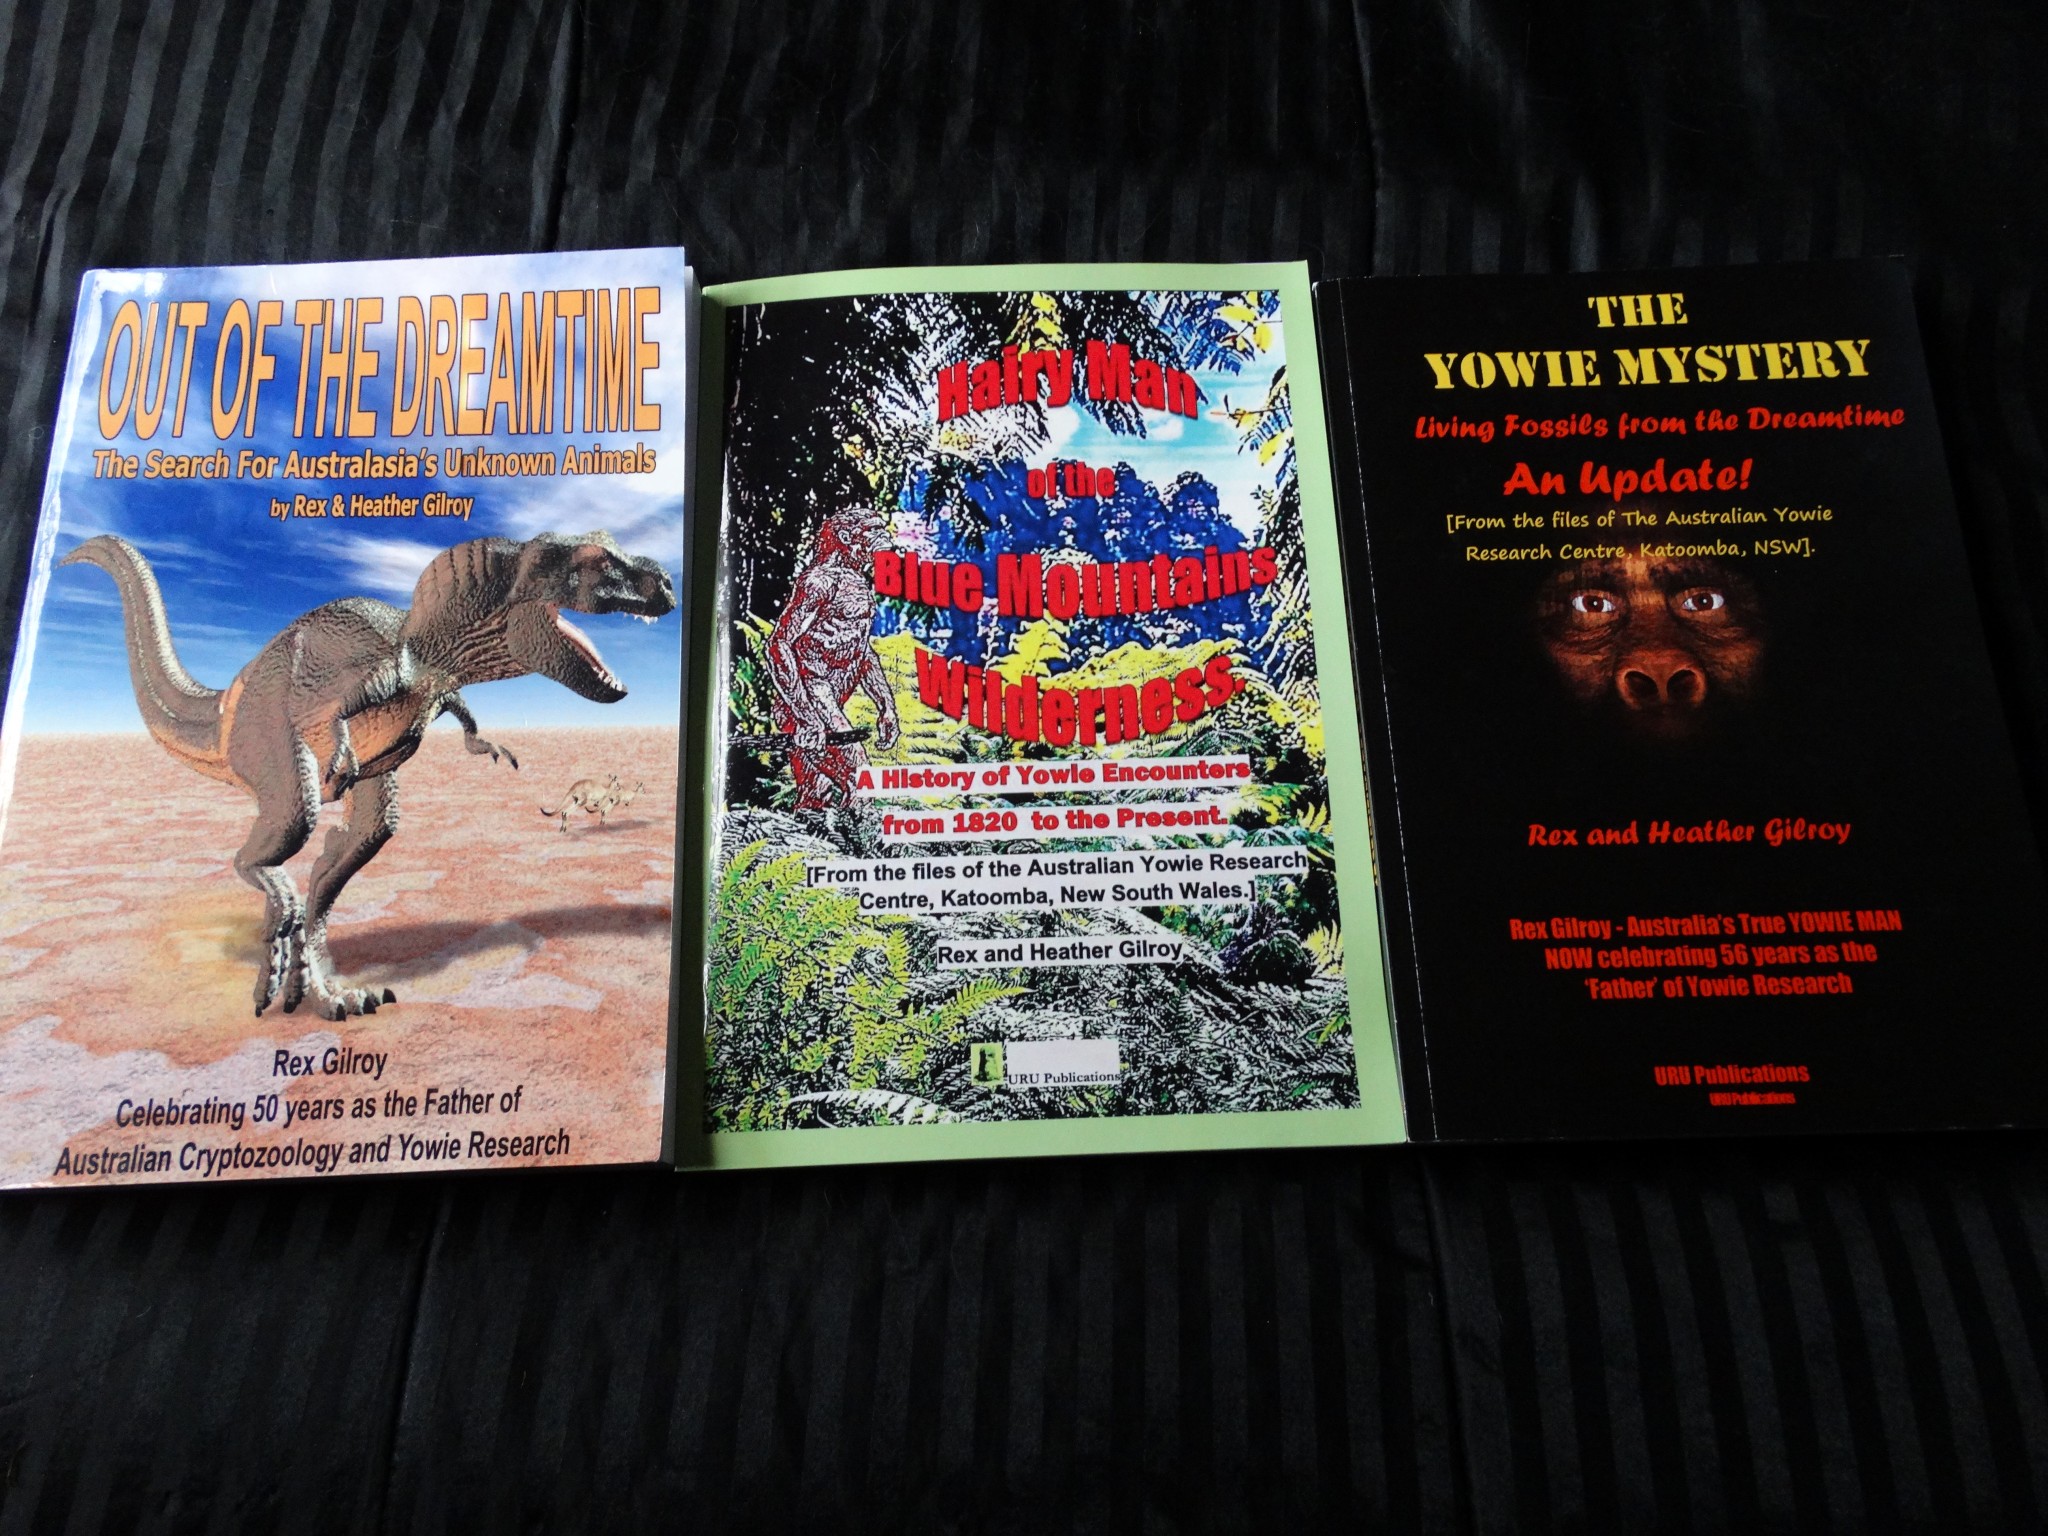 Books by Rex Gilroy. Recommended reading on Yowie Research